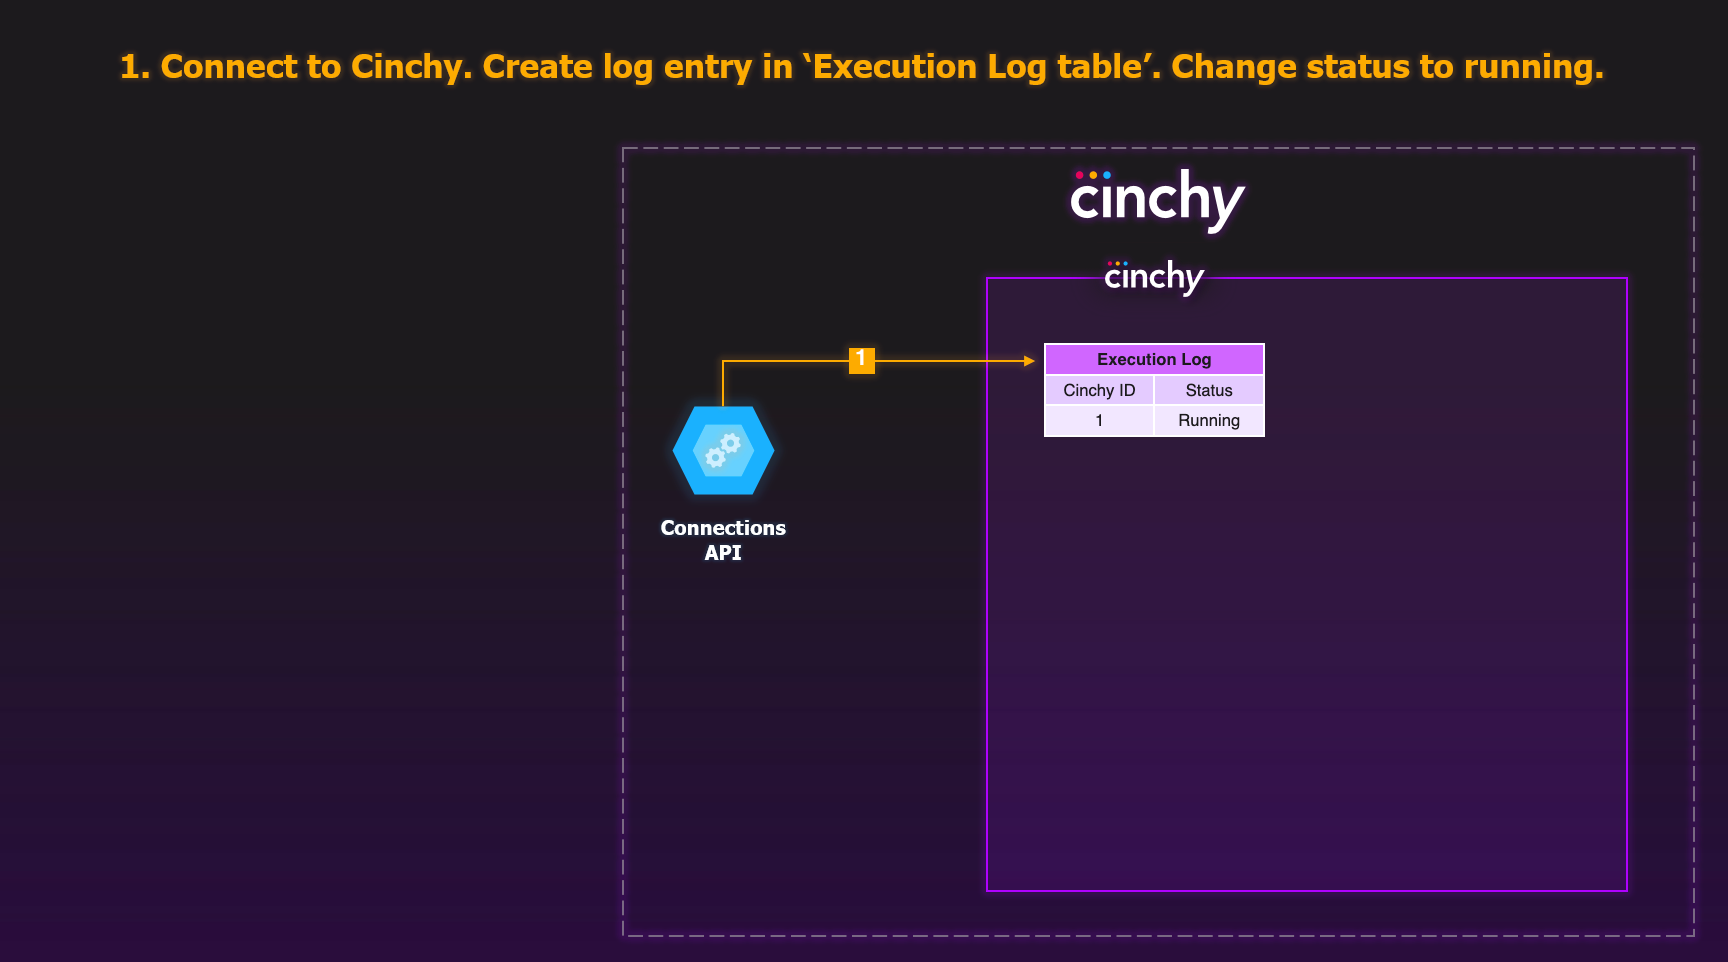 The sync connects to Cinchy and creates a log entry in the Execution Log table with a status of running.